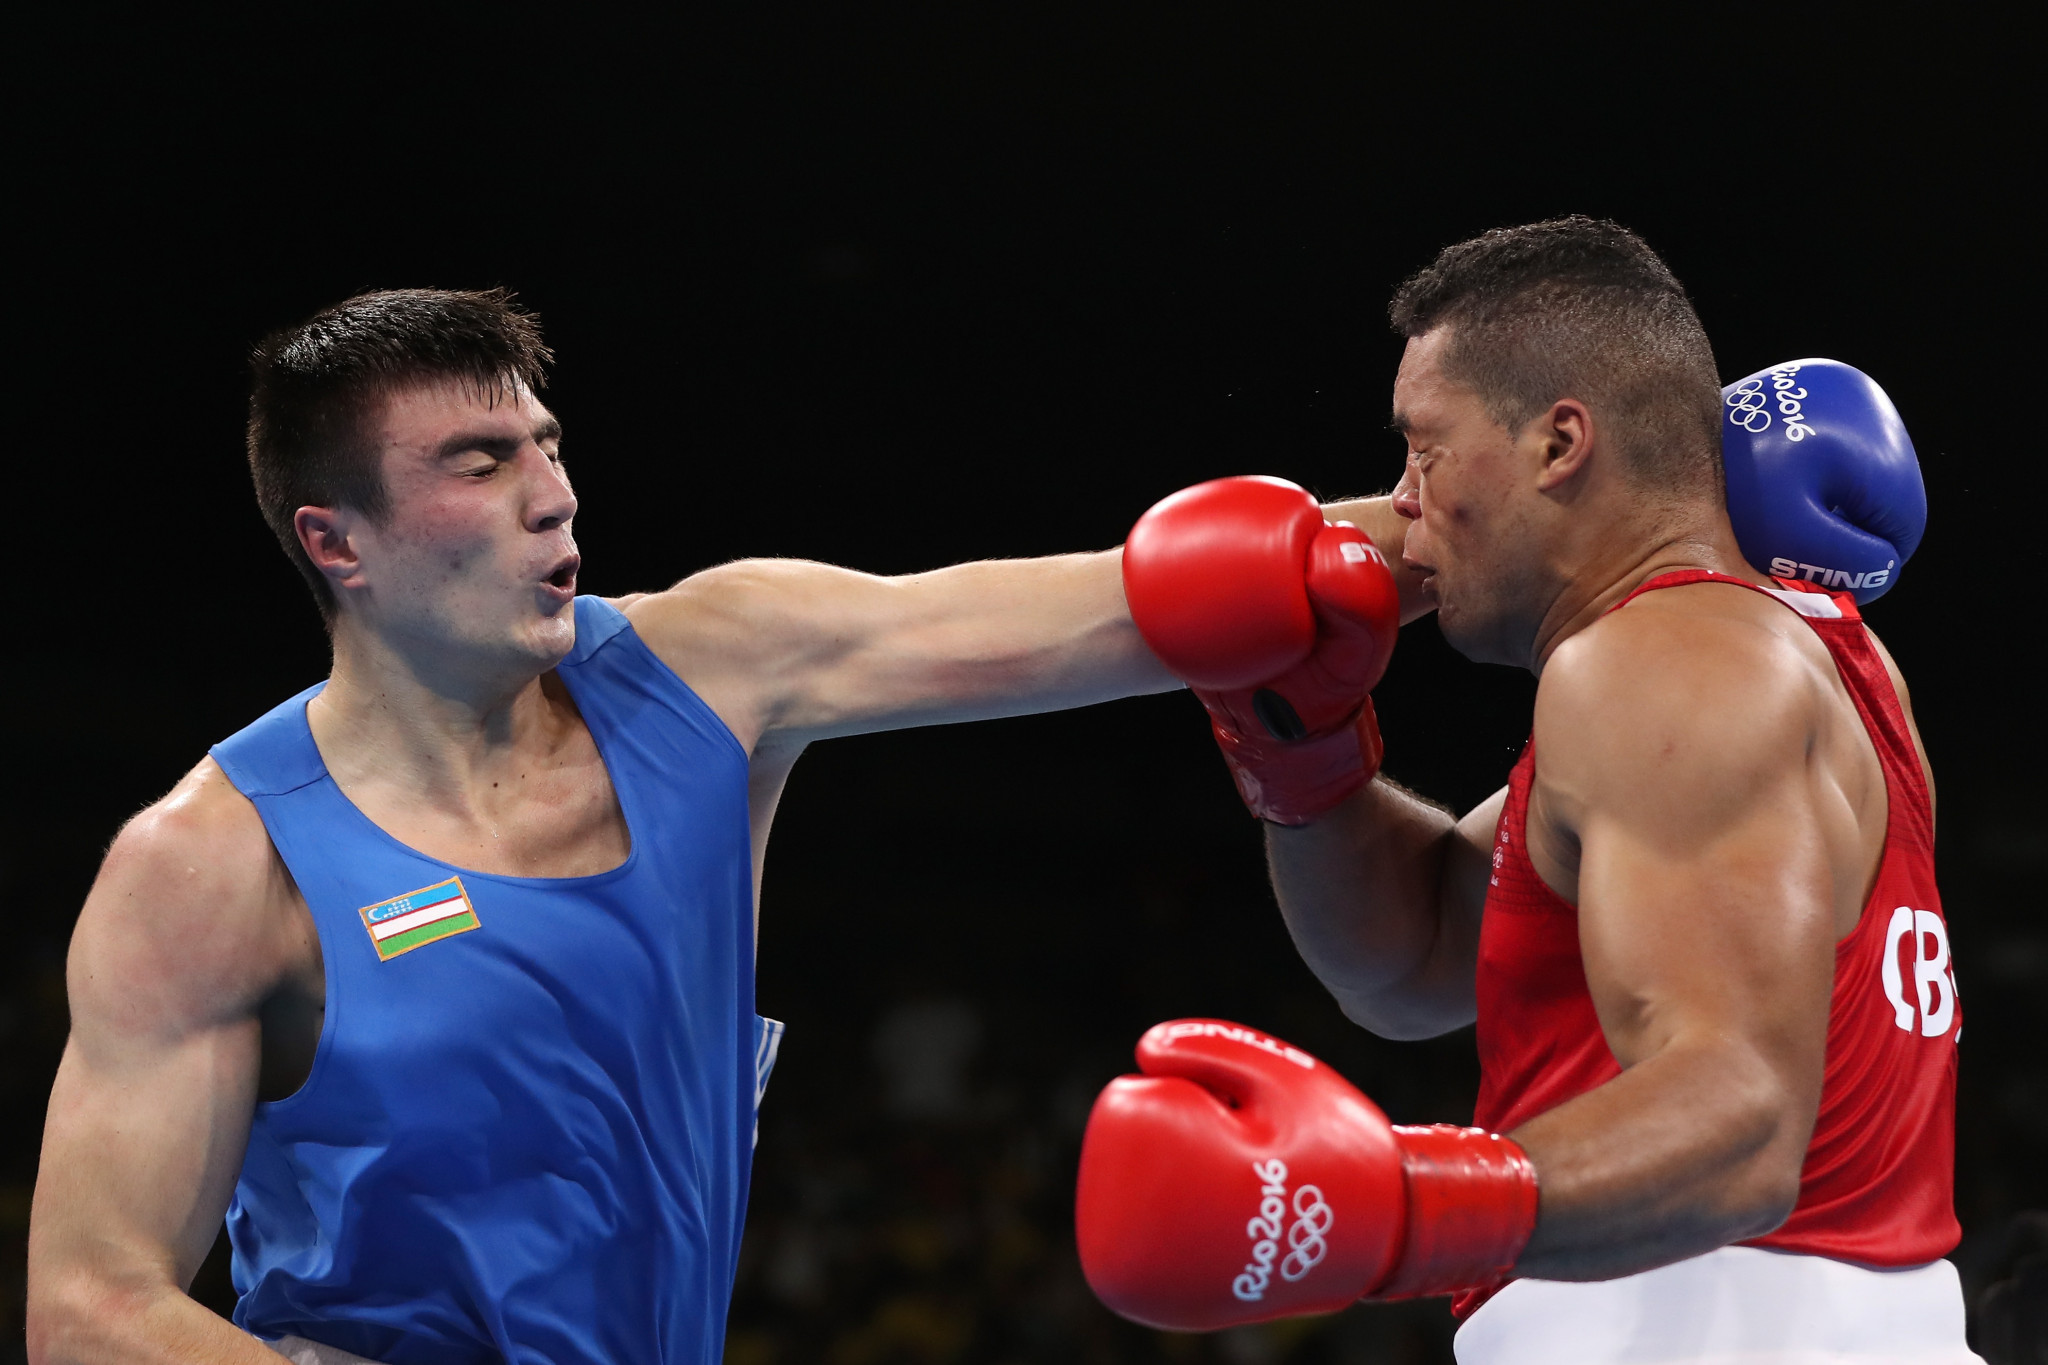 Two-time Asian super heavyweight champion Jalolov impresses in first bout of AIBA Men's World Championships